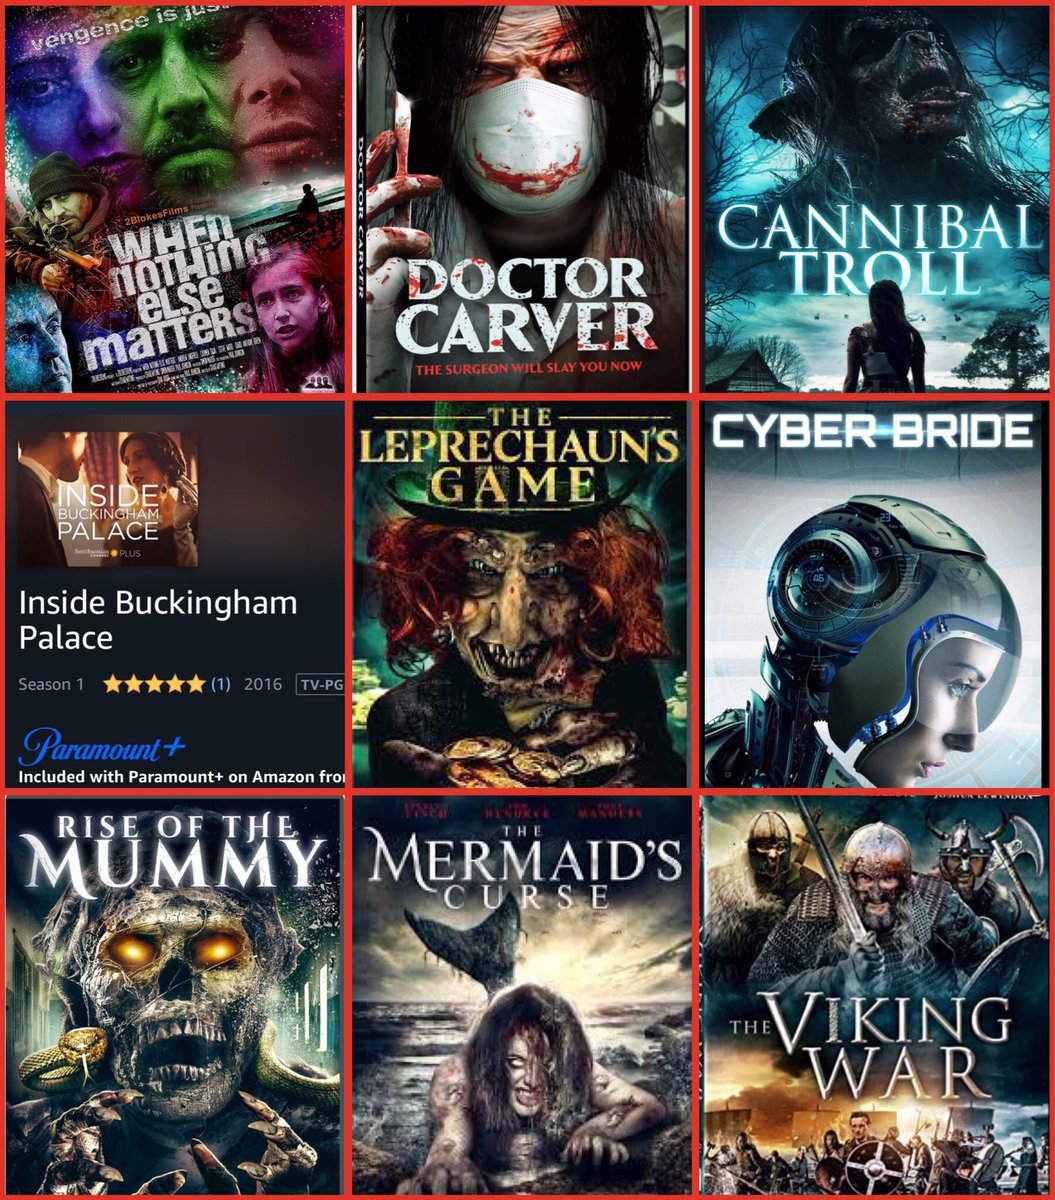 I thought I will make a list of films I m starring in that are available on Amazon Prime right now. I think one or two are available for free, the rest is on demand and almost all came out on DVDs in US UK Europe and Asia , enjoy! #seekingrepresentation #actress @SupportBritish